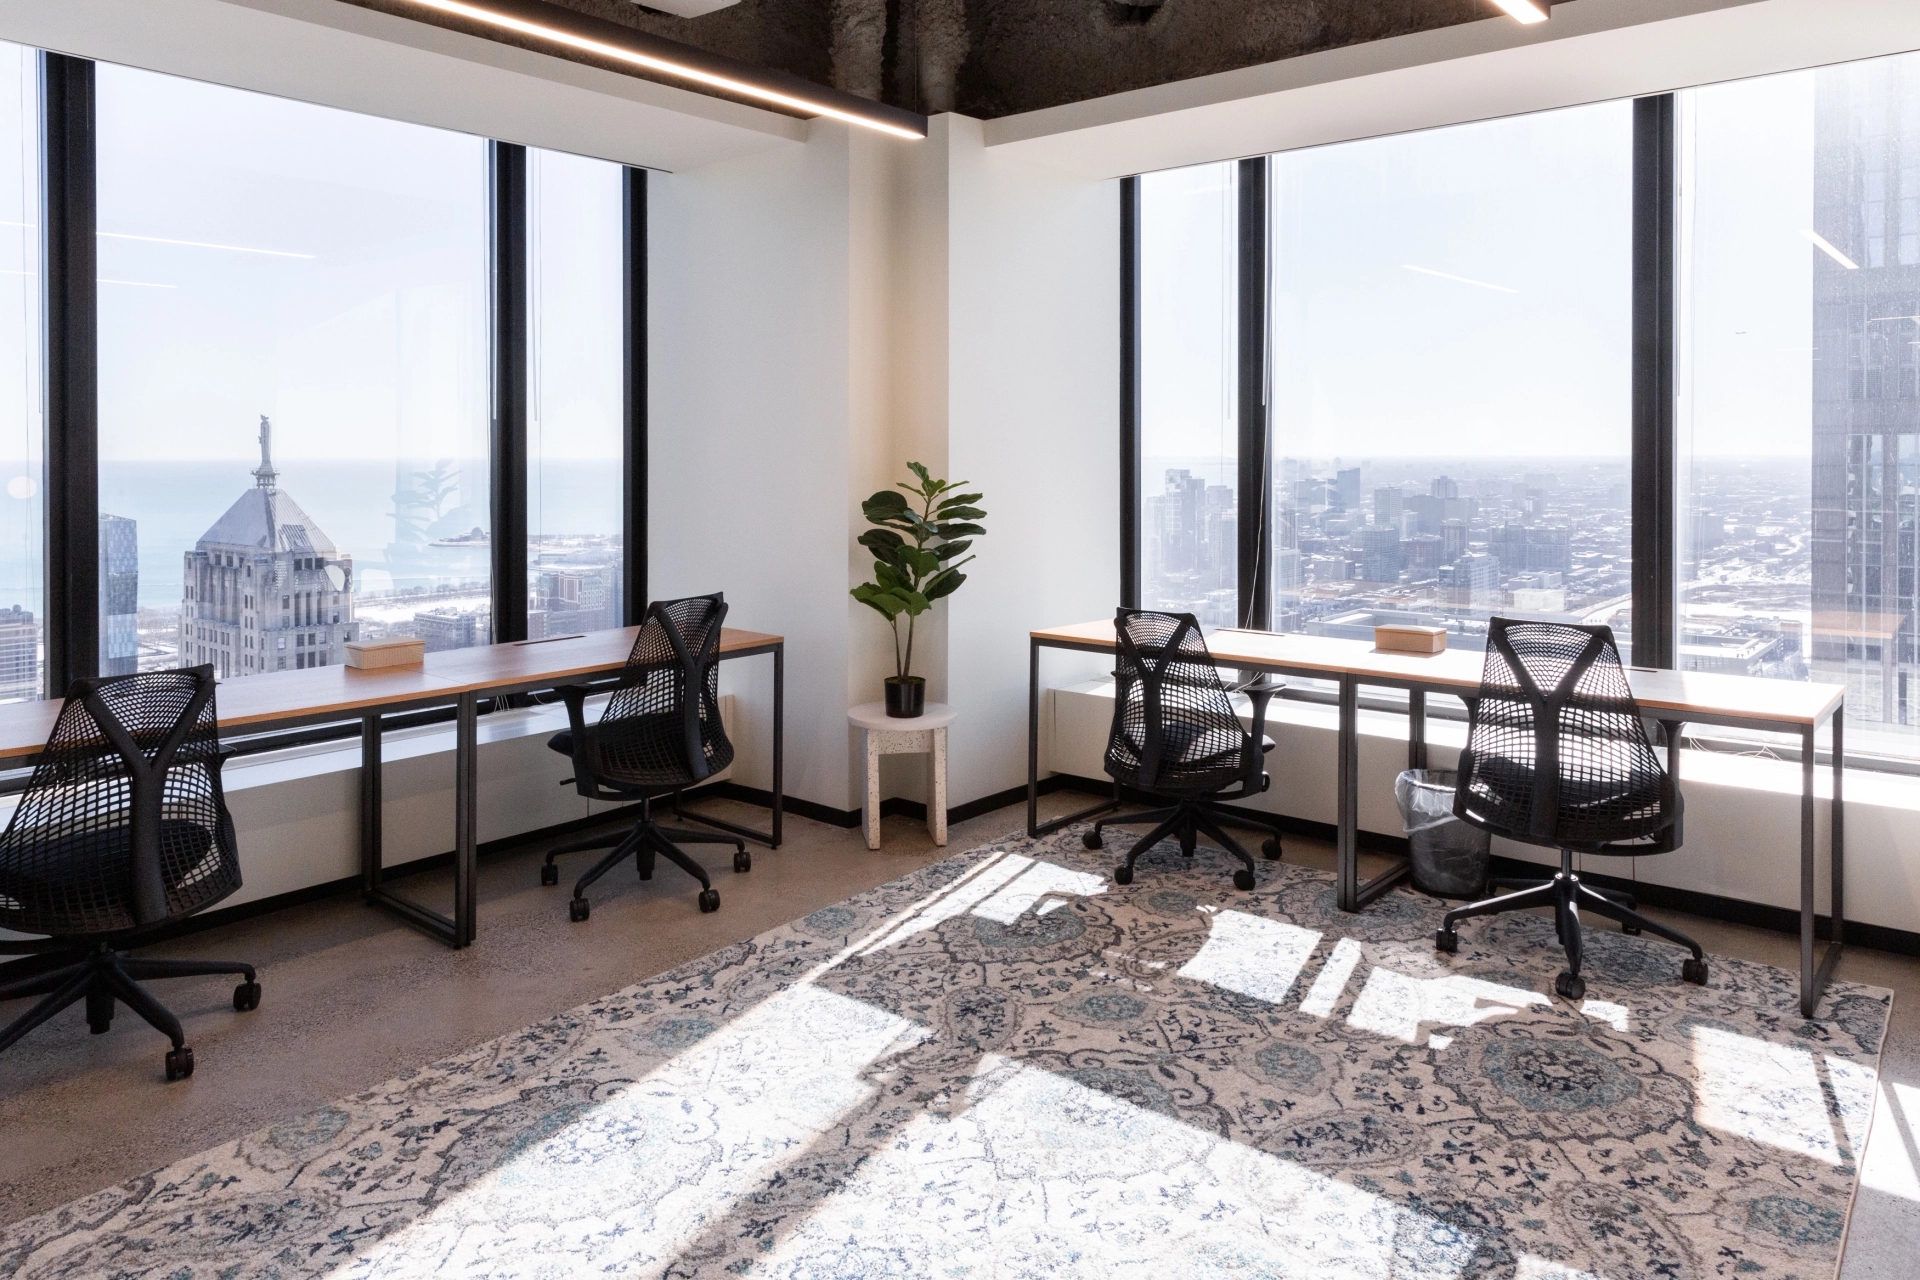 A Chicago office with spacious windows providing a scenic city view for an ideal workspace environment.